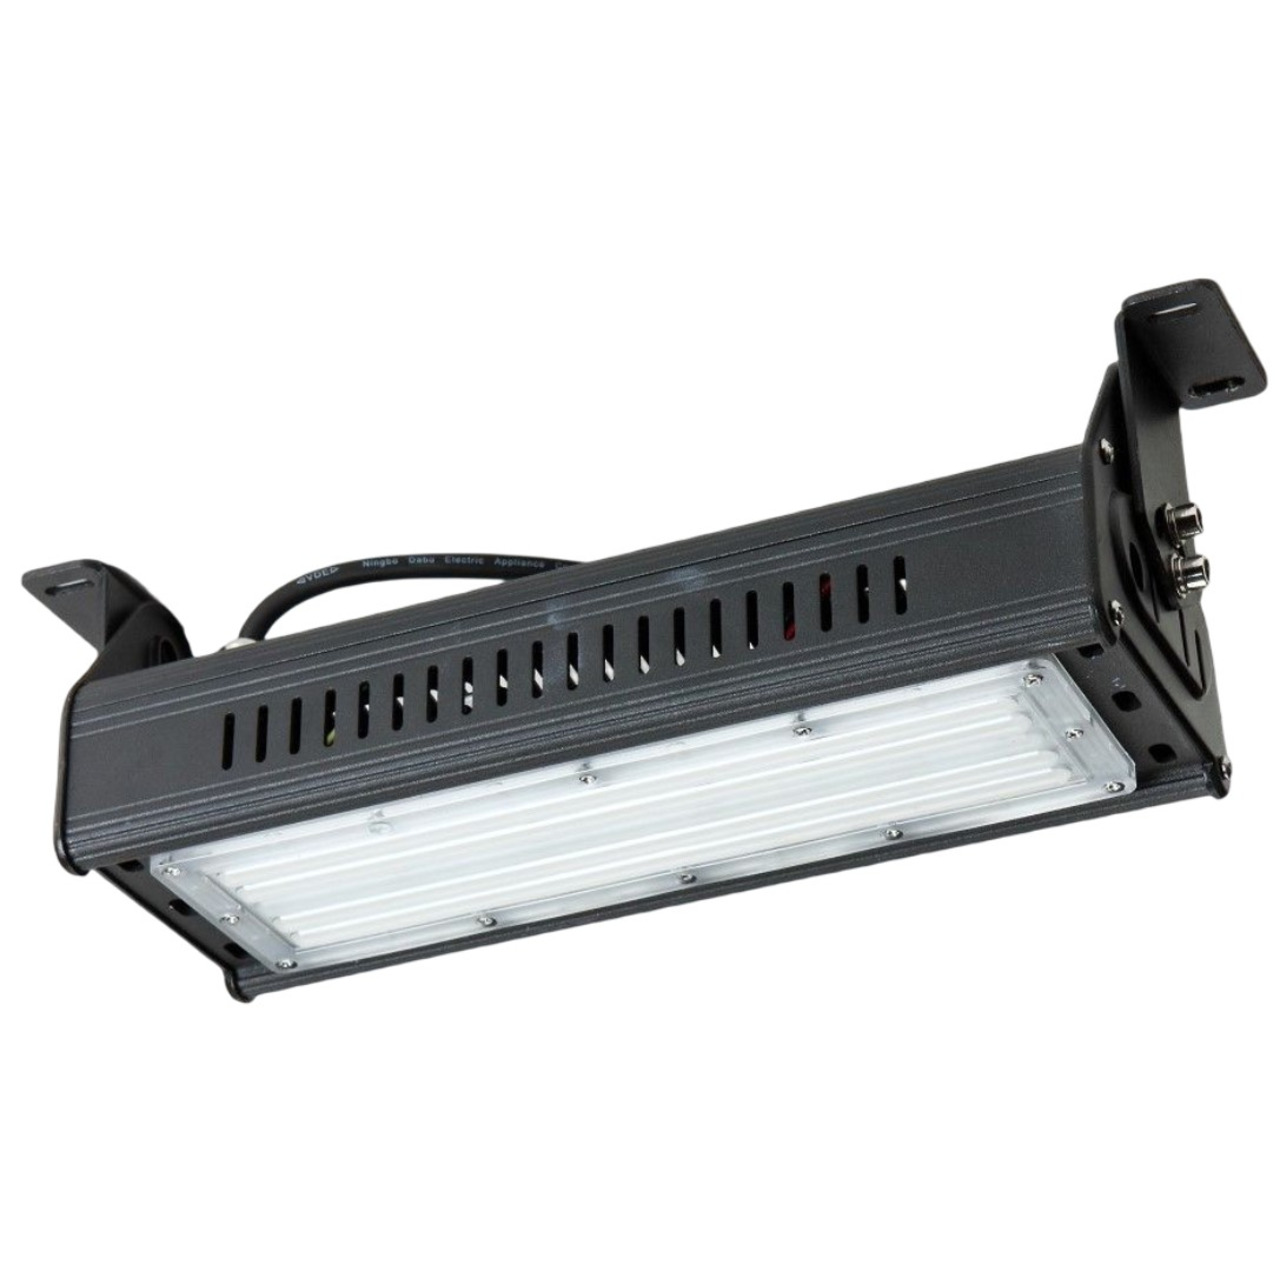 ENOVALITE 50-W-LED-Strahler Linear-HighBay 50- 6000 lm- 120 lm-W- 5000 K- neutralweiss- IP65 unter Beleuchtung